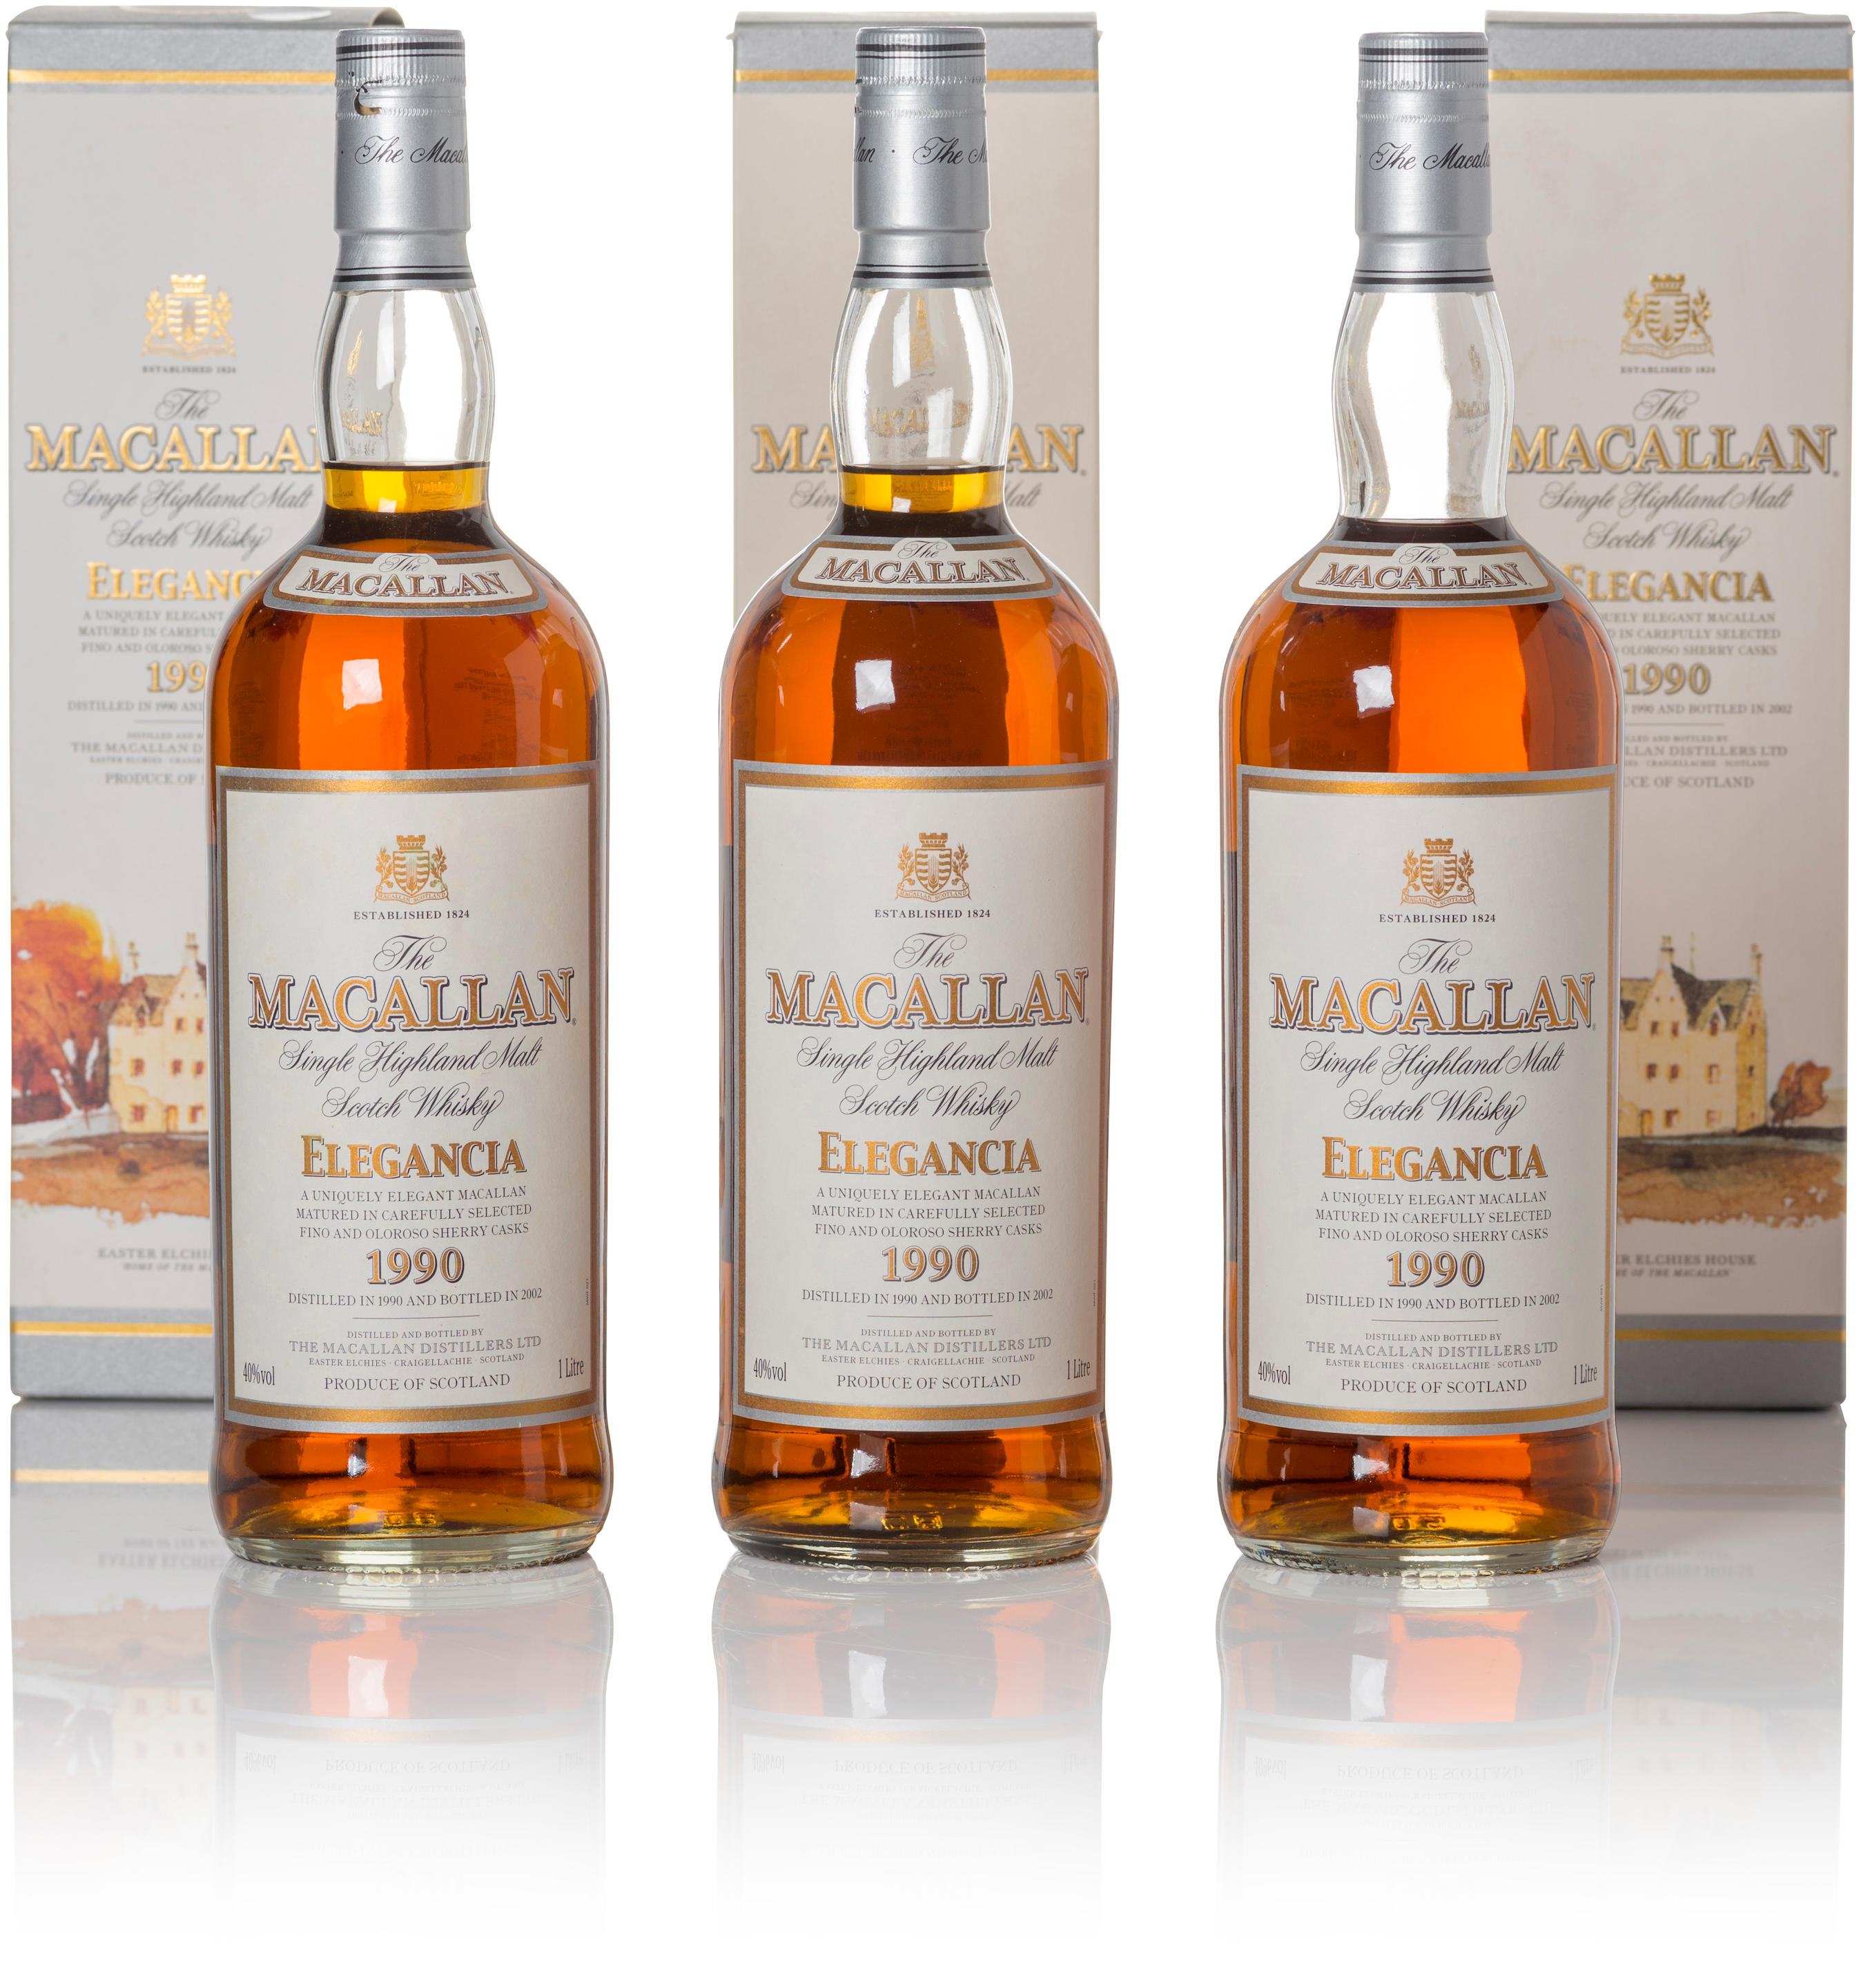 Auction Fine Rare Wine Cognac And Single Malt Whisky At 17 11 2017 Lotsearch